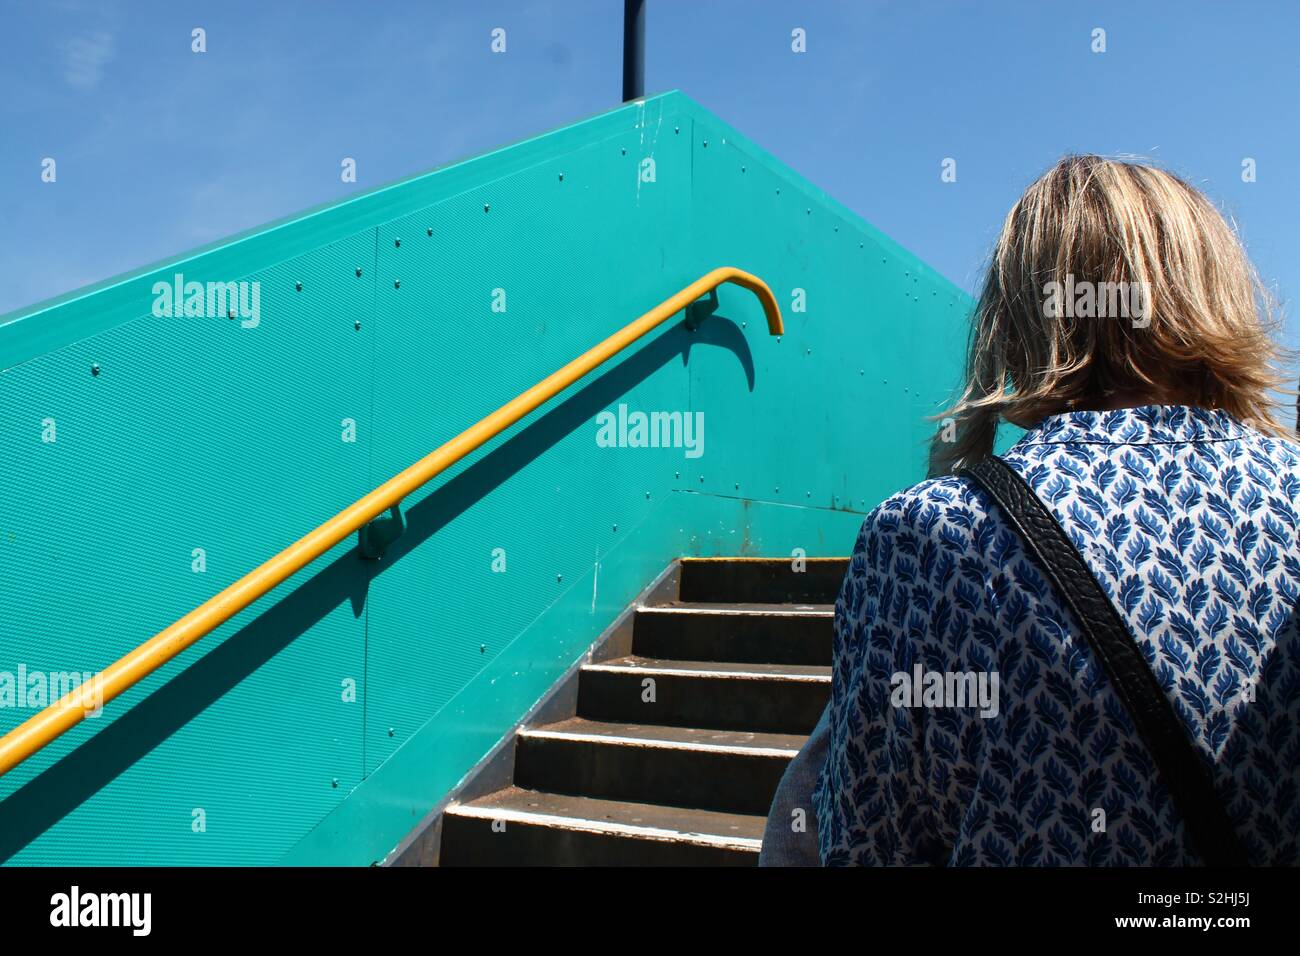 Woman standing in front of a stairwell Stock Photo